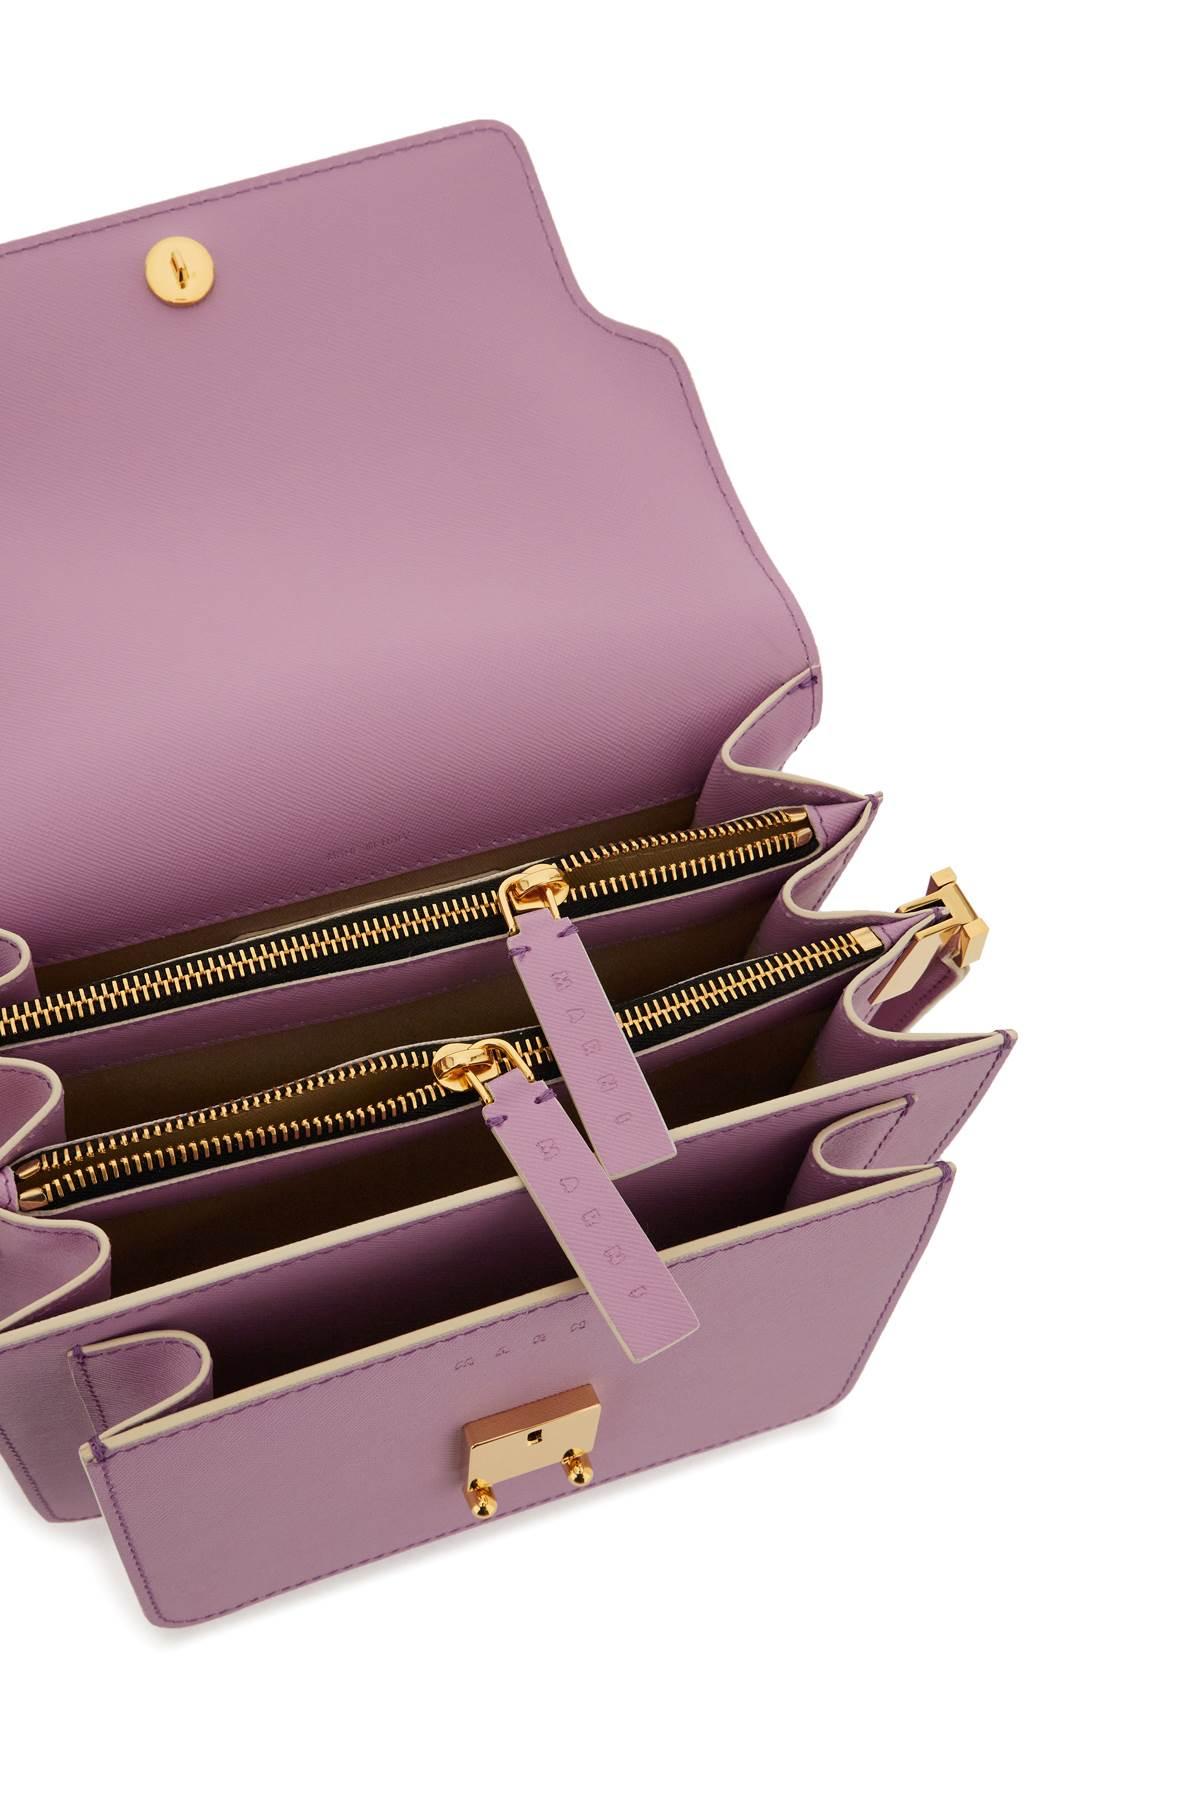 TRUNK mini bag in brown lilac and black saffiano leather